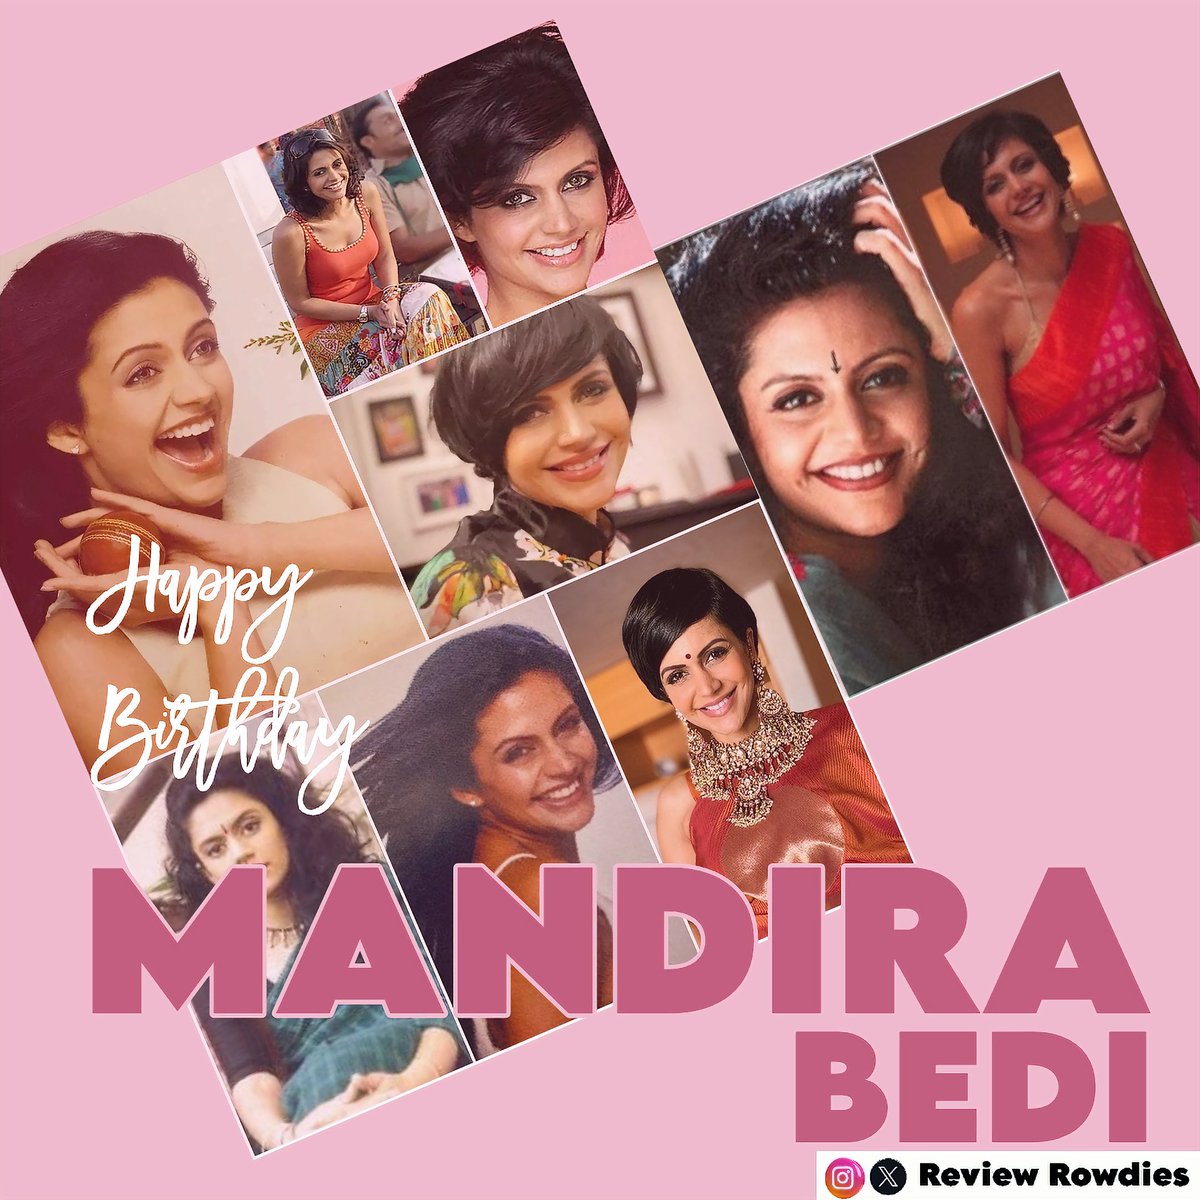 Wishing a very Happy Birthday to @mandybedi 

#HBDMandiraBedi #MandiraBedi #HappyBirthdayMandiraBedi #MandiraBediBirthday #Reviewrowdies